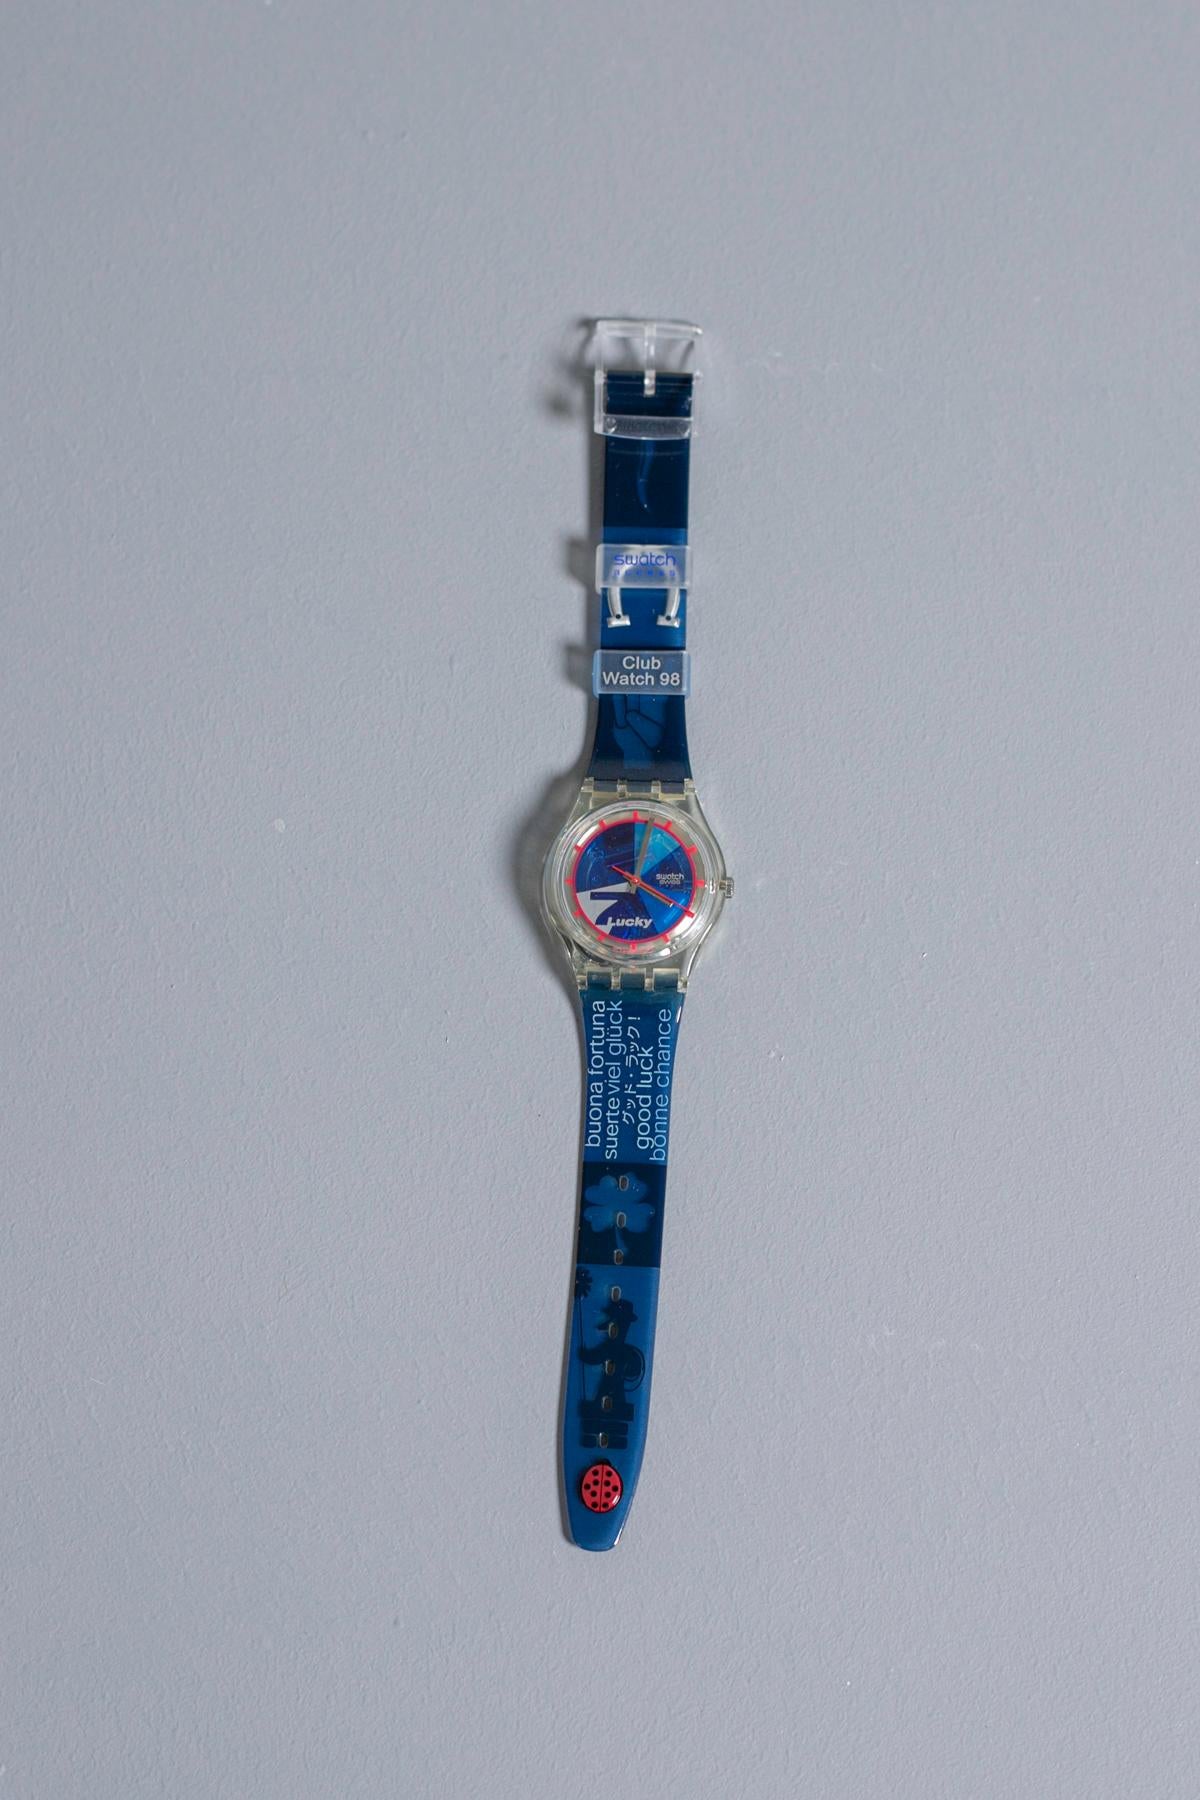 swatch keywatch function